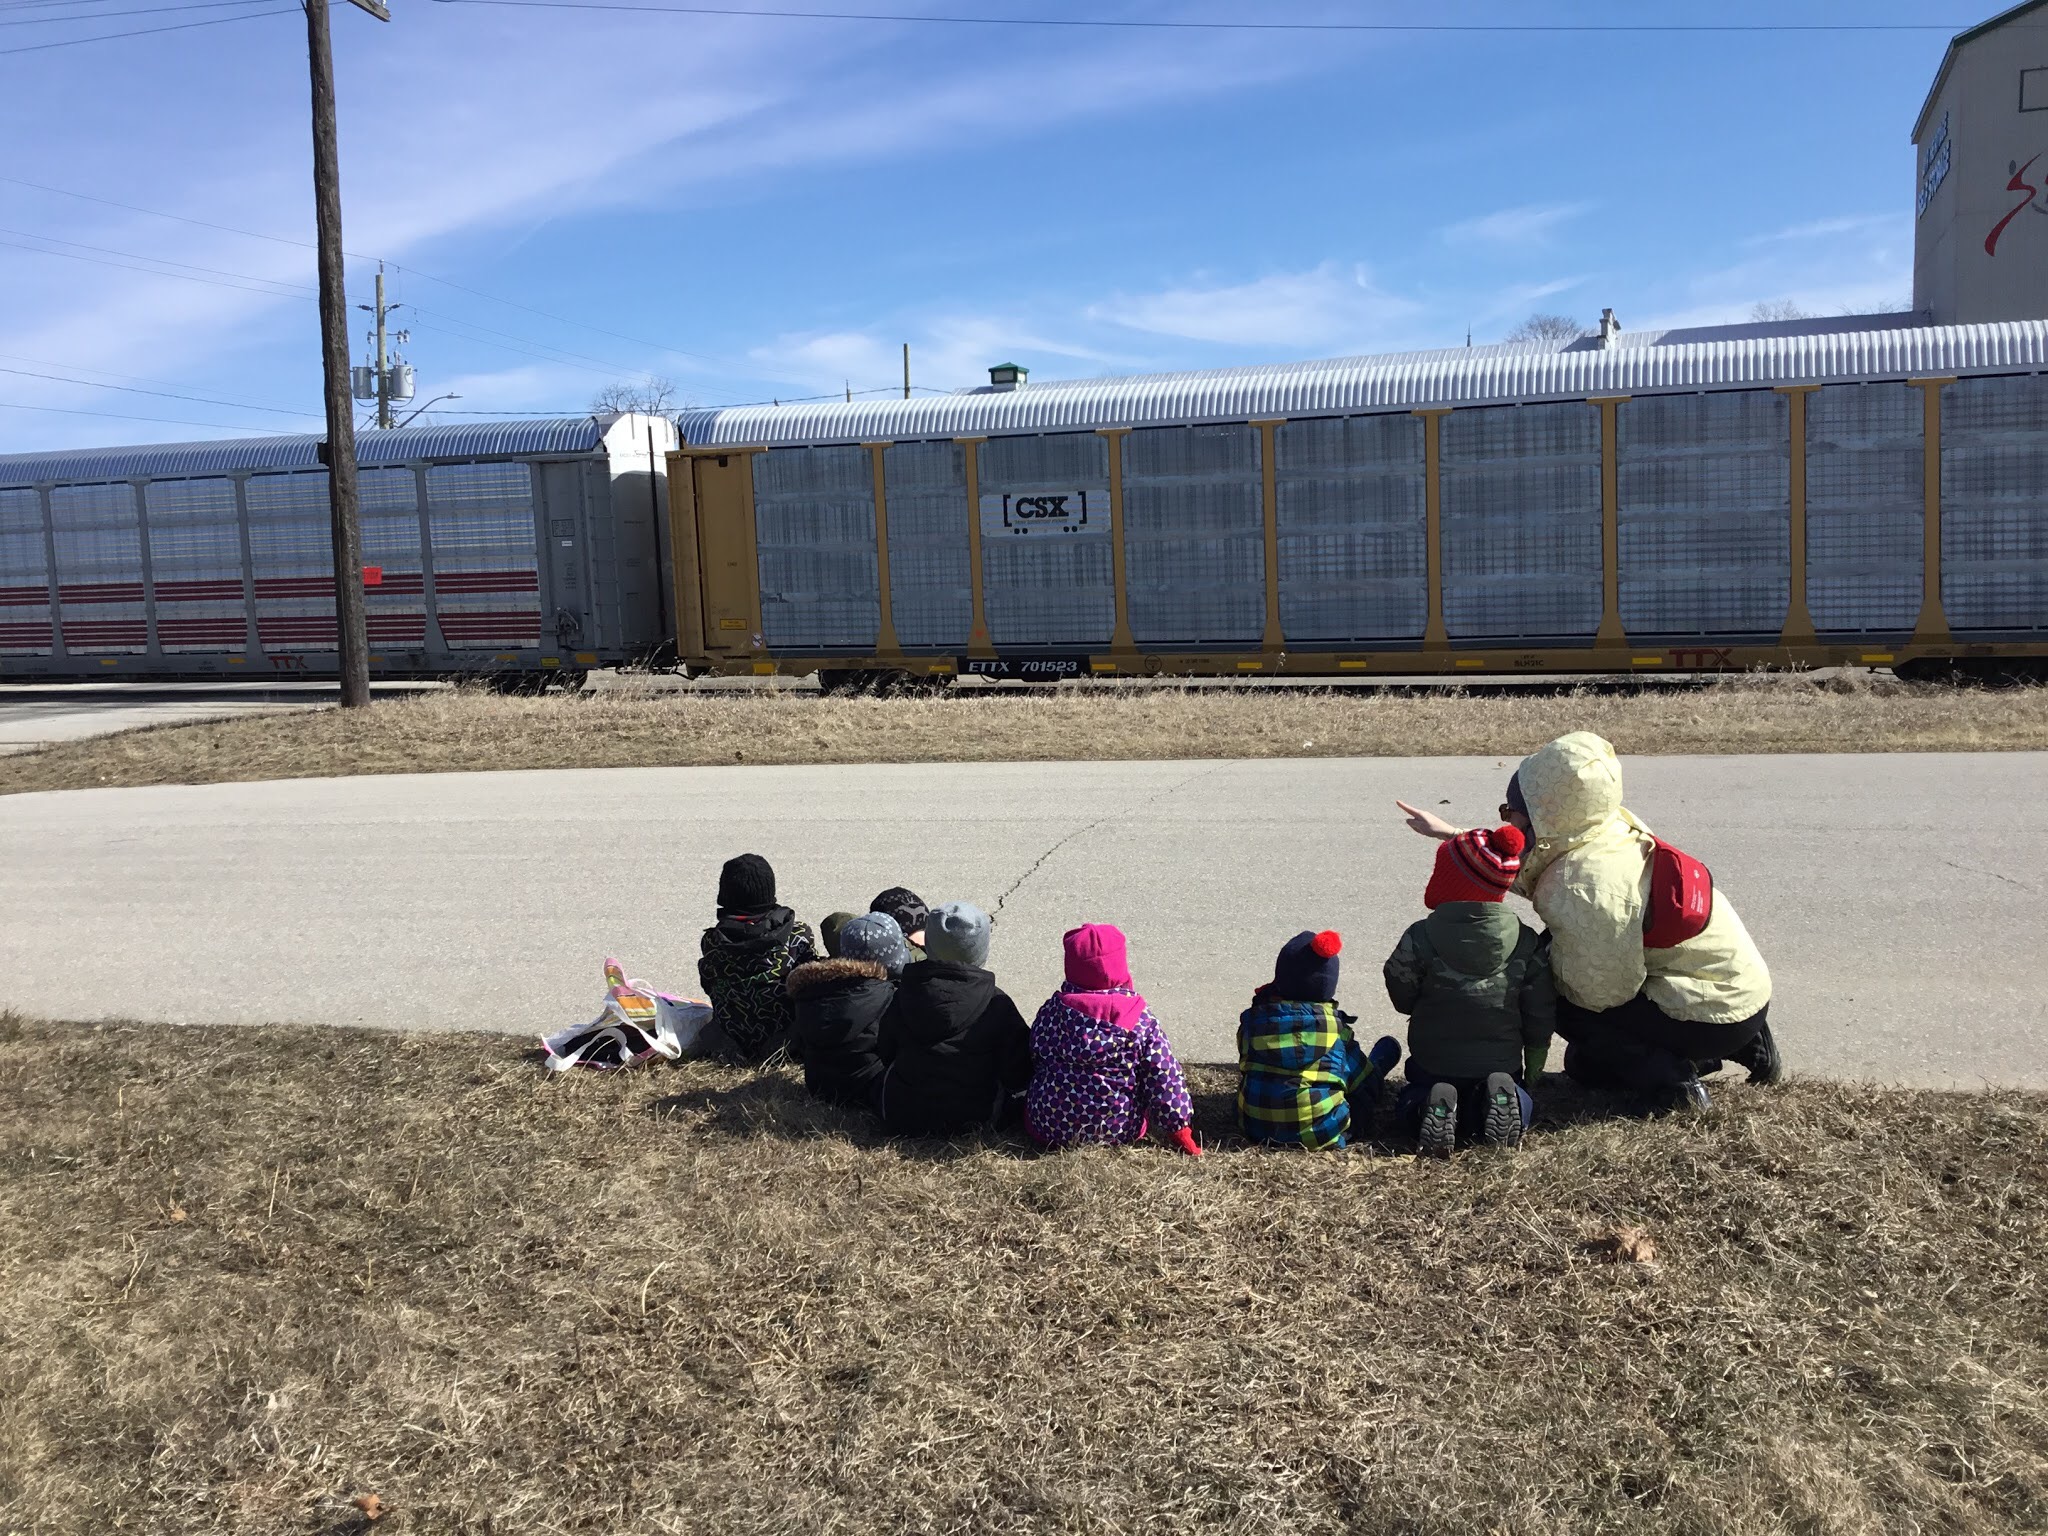 kids watching a train go by